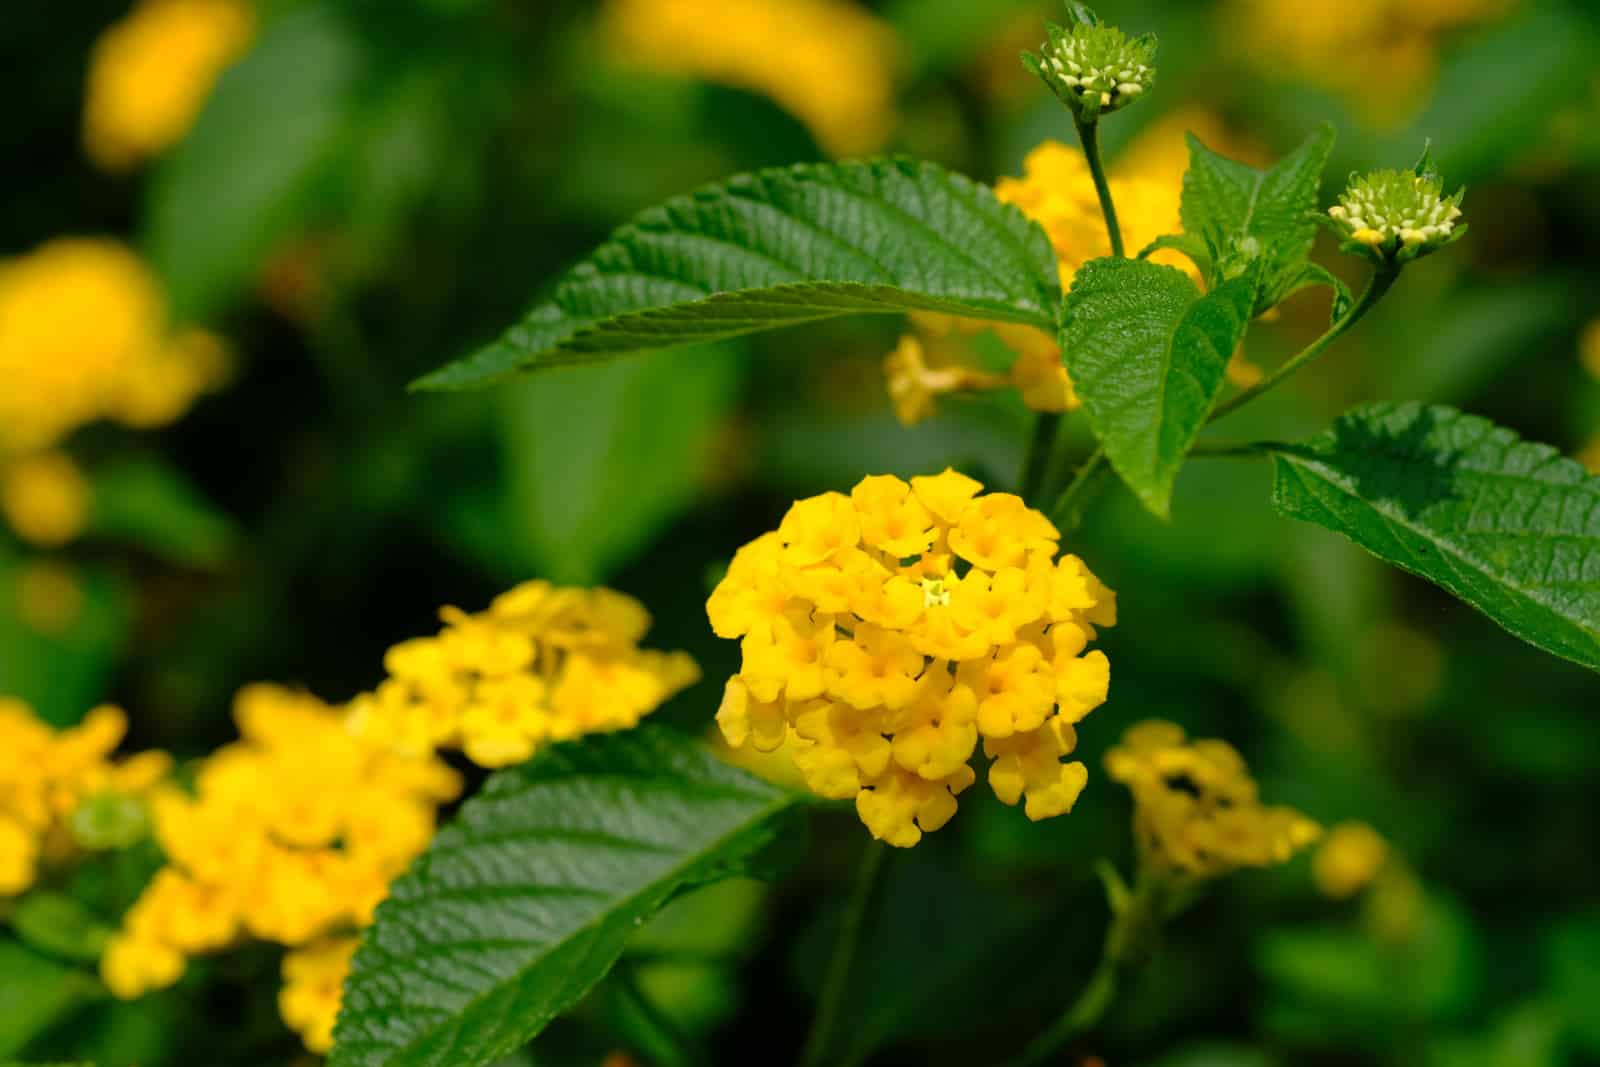 Yellow lantana is a type of flowering plant from the Verbenaceae family